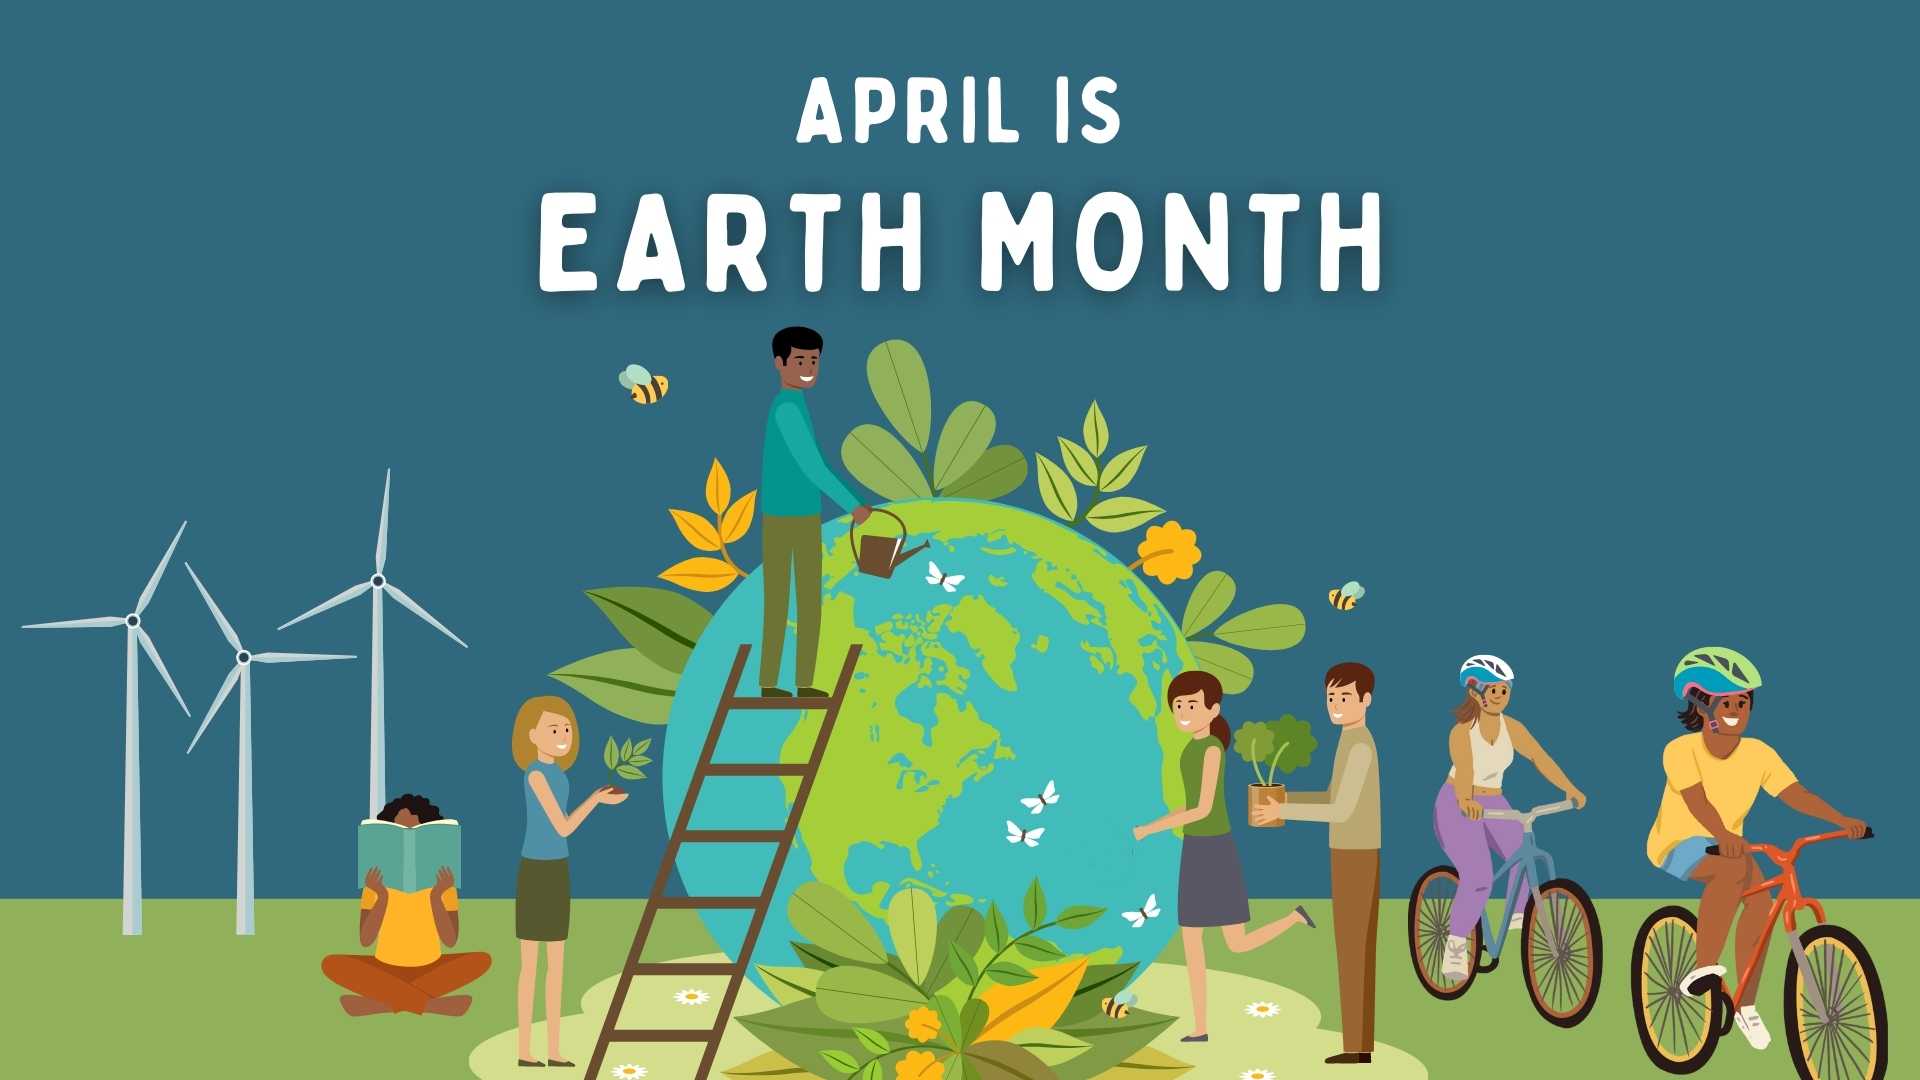 Text: April is Earth Month Visual: illustration of people taking care of the earth and partaking in Earth care realated activities such as biking, being outdoors, planting.